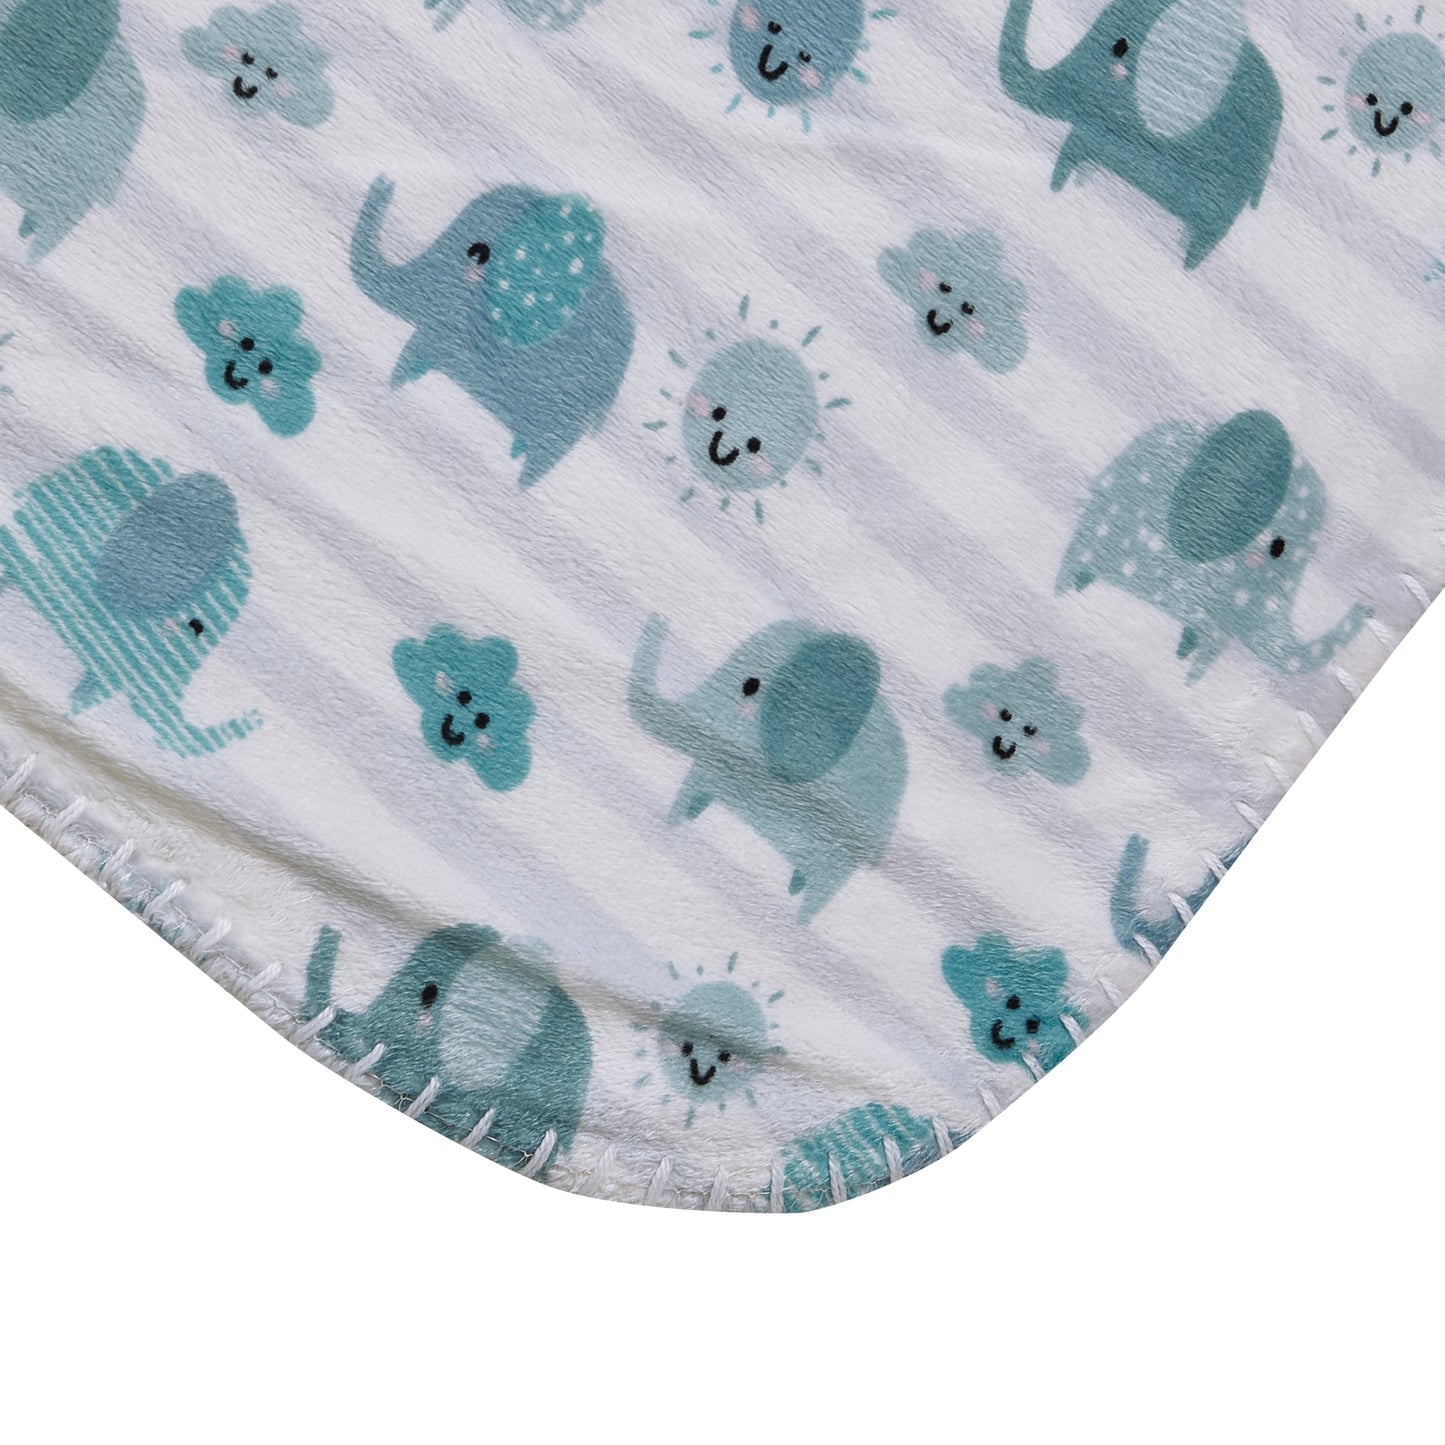 Mon Lapin by Thesis Print Mink Baby Blanket - Elephant